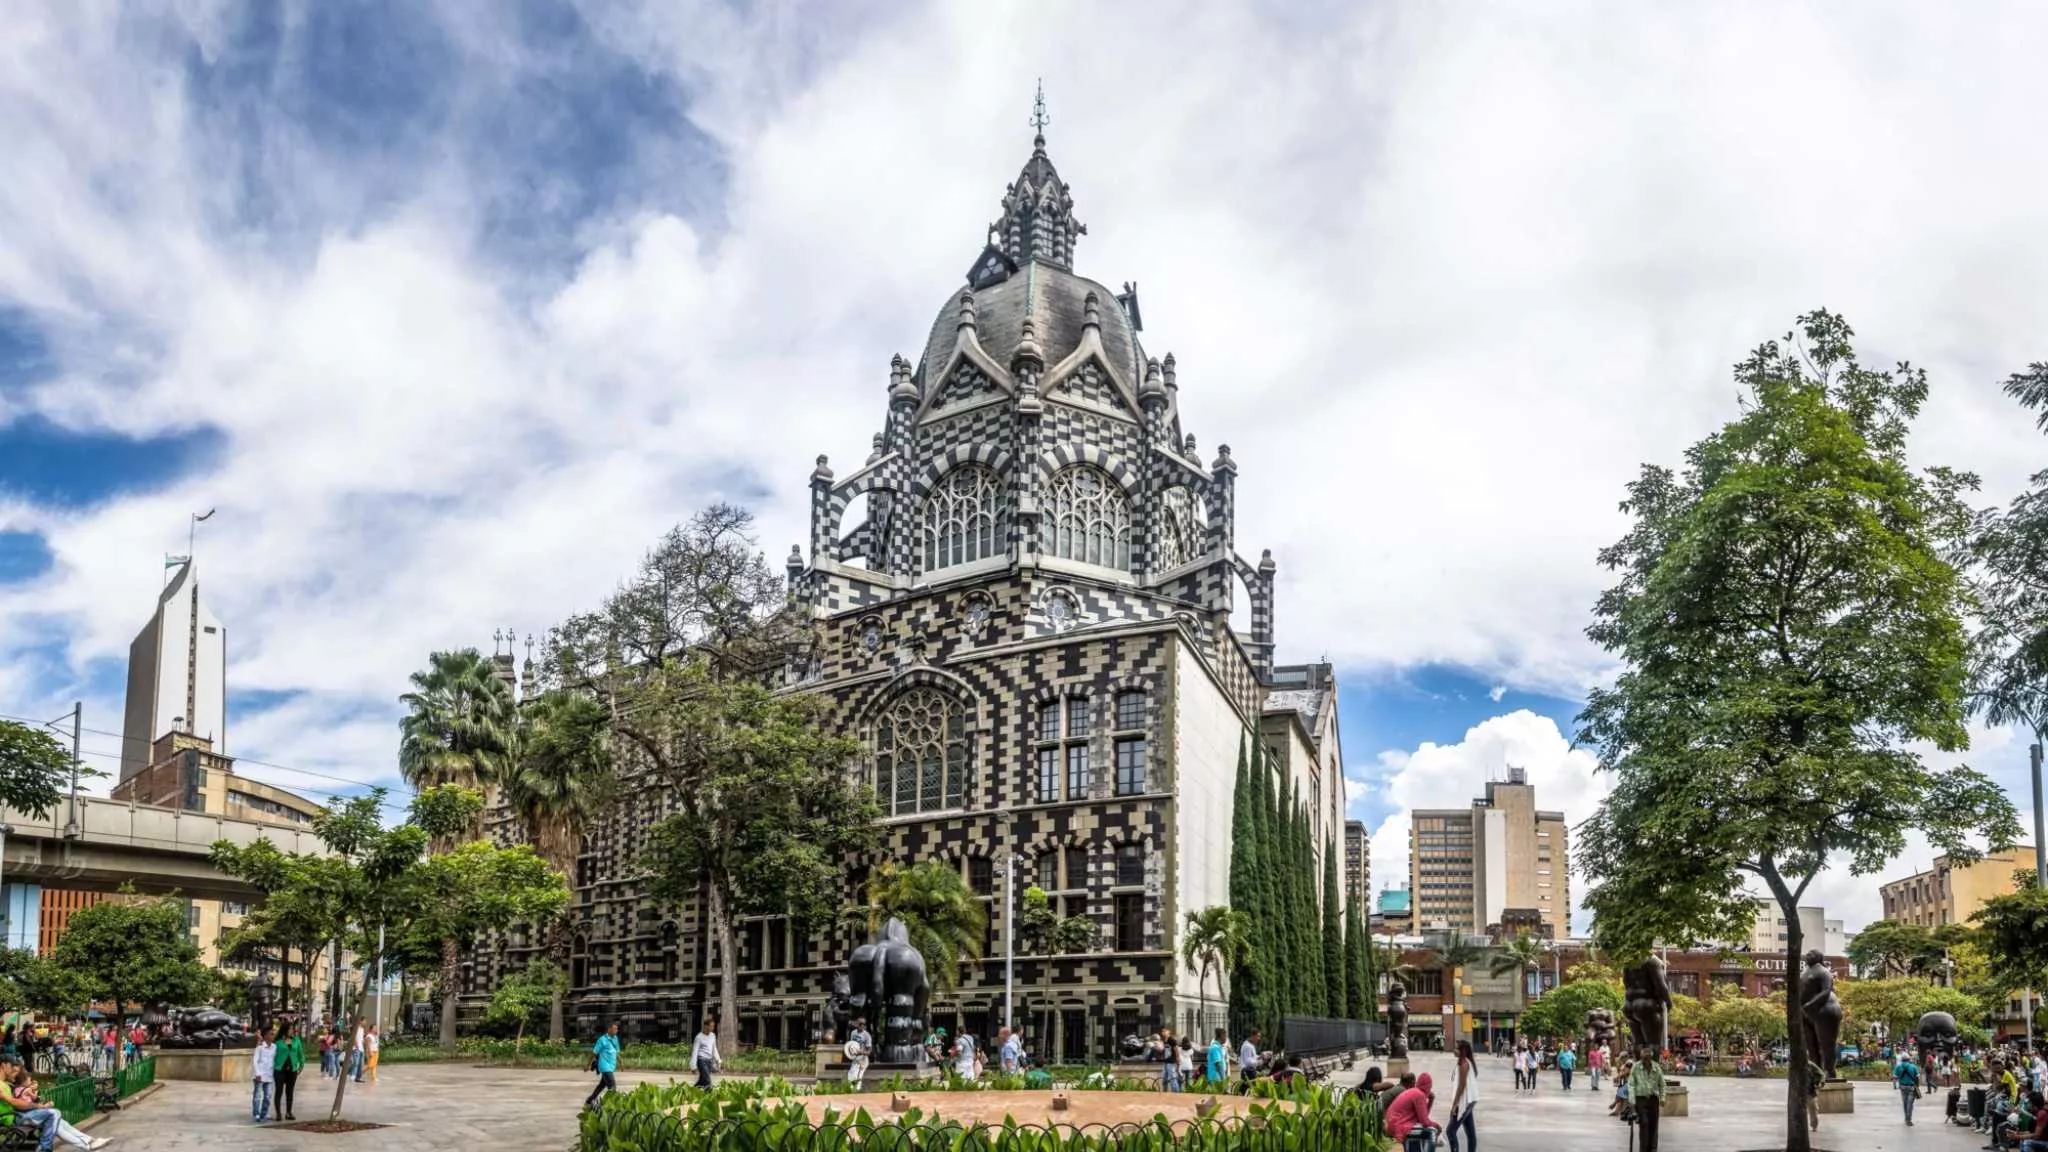 Palace of Culture Rafael Uribe Uribe in Colombia, South America | Architecture - Rated 3.8